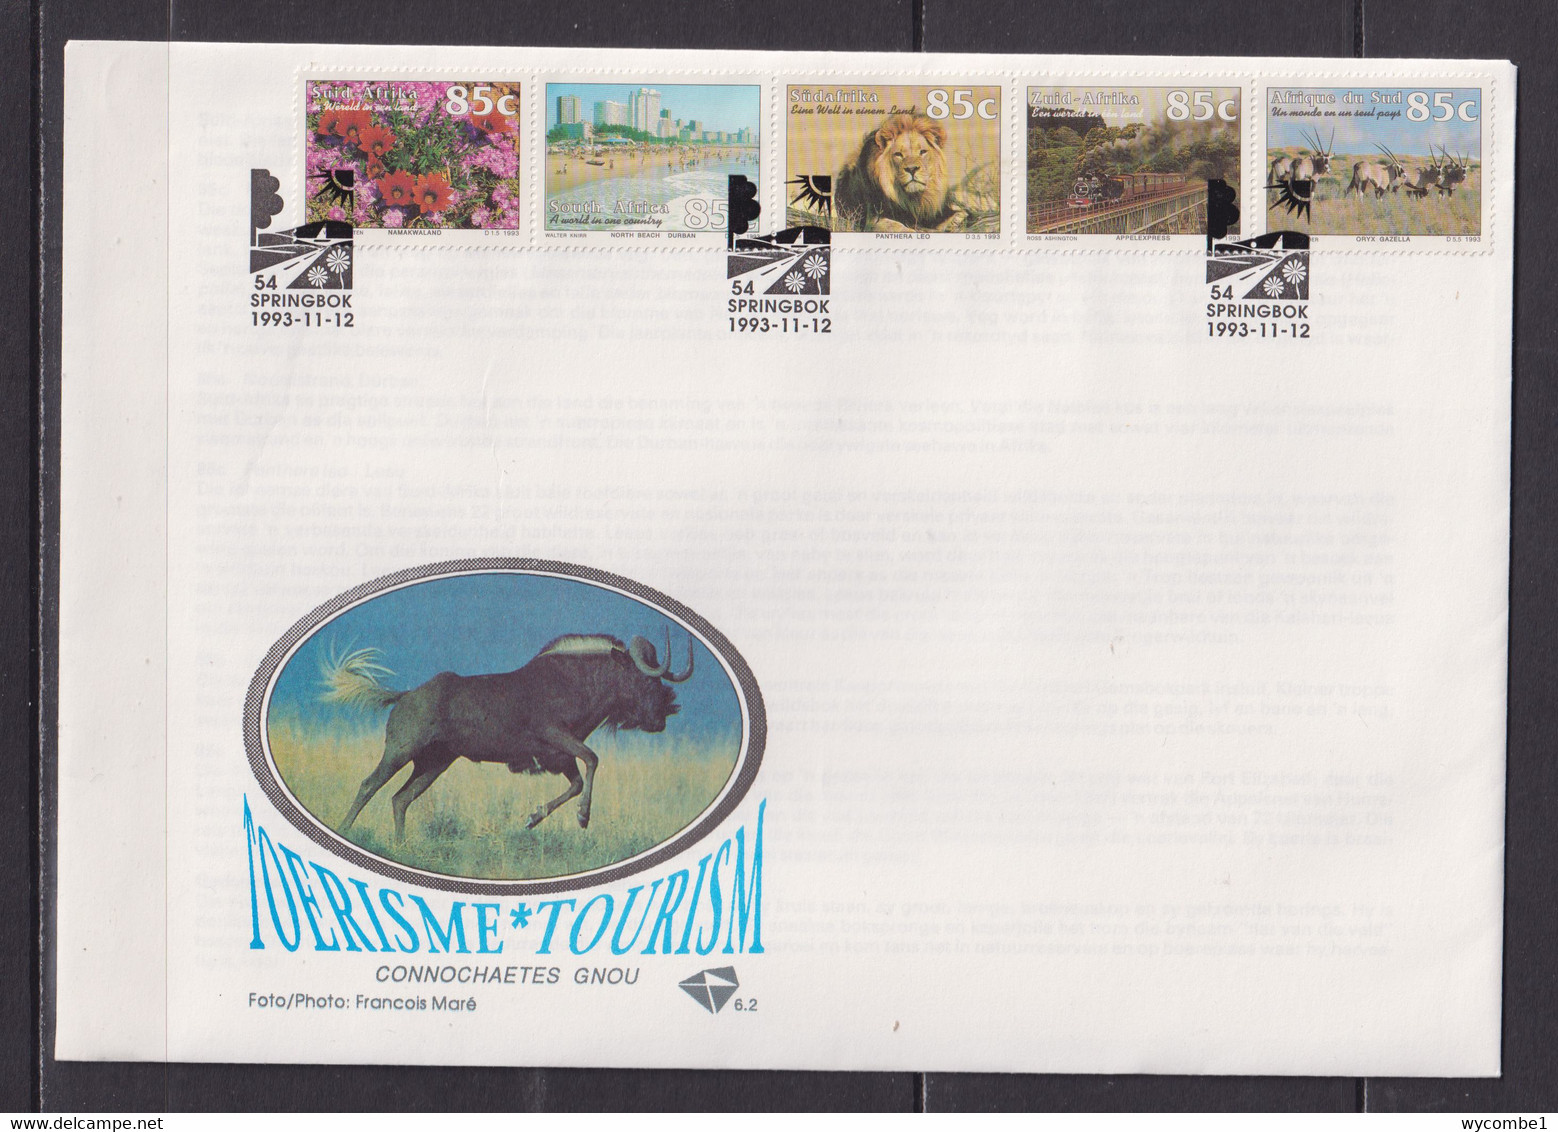 SOUTH AFRICA - 1993 Tourism Large FDC As Scan - Briefe U. Dokumente